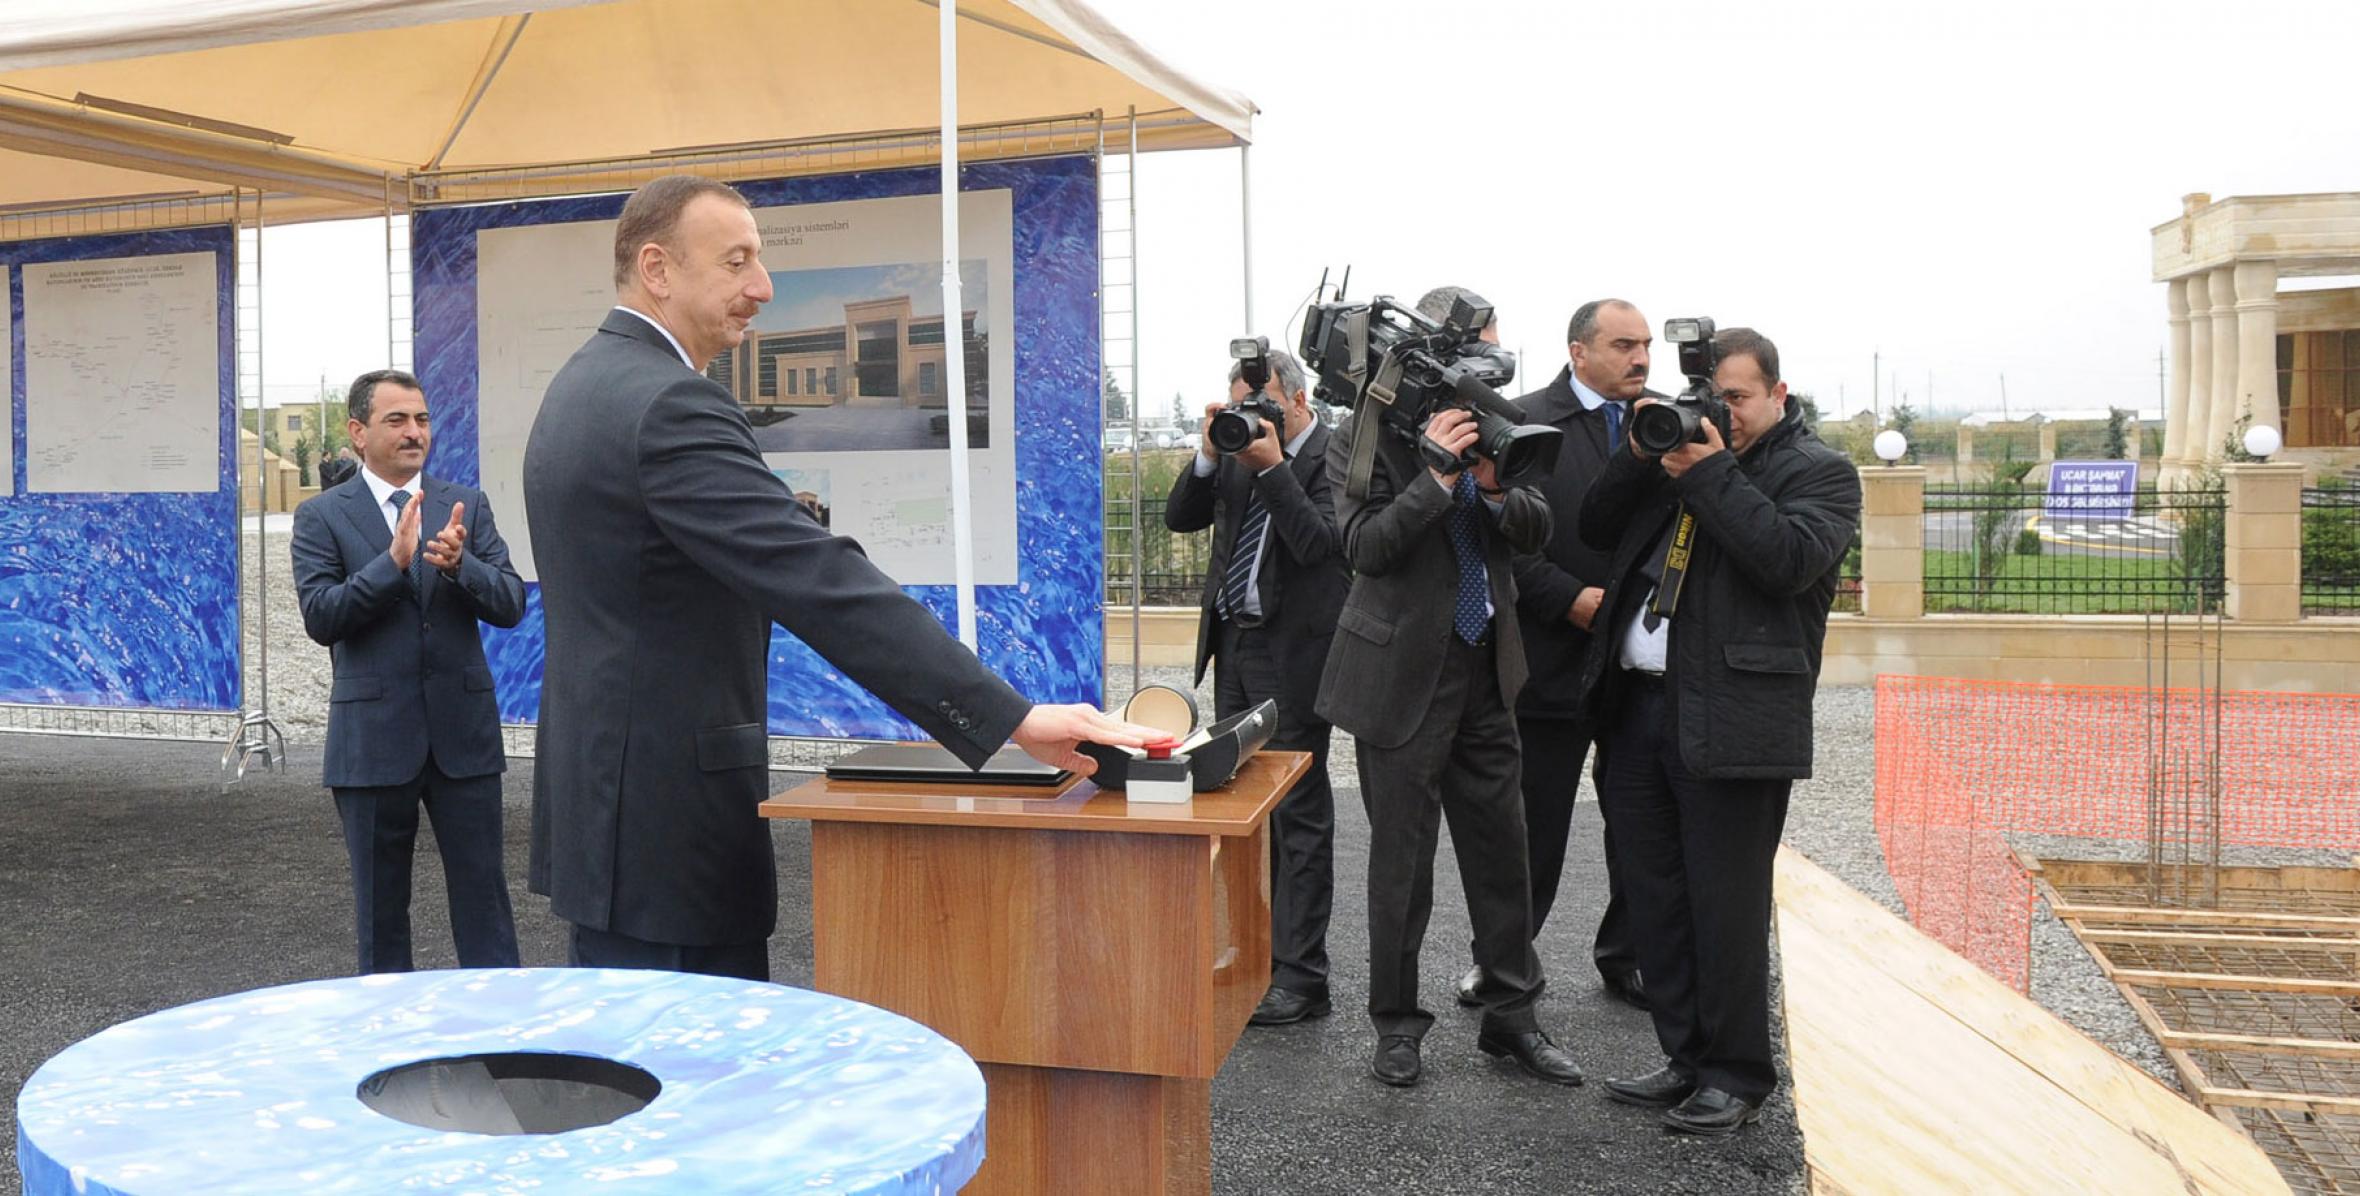 Ilham Aliyev attended a groundbreaking ceremony for a water and sewage facility in Ujar